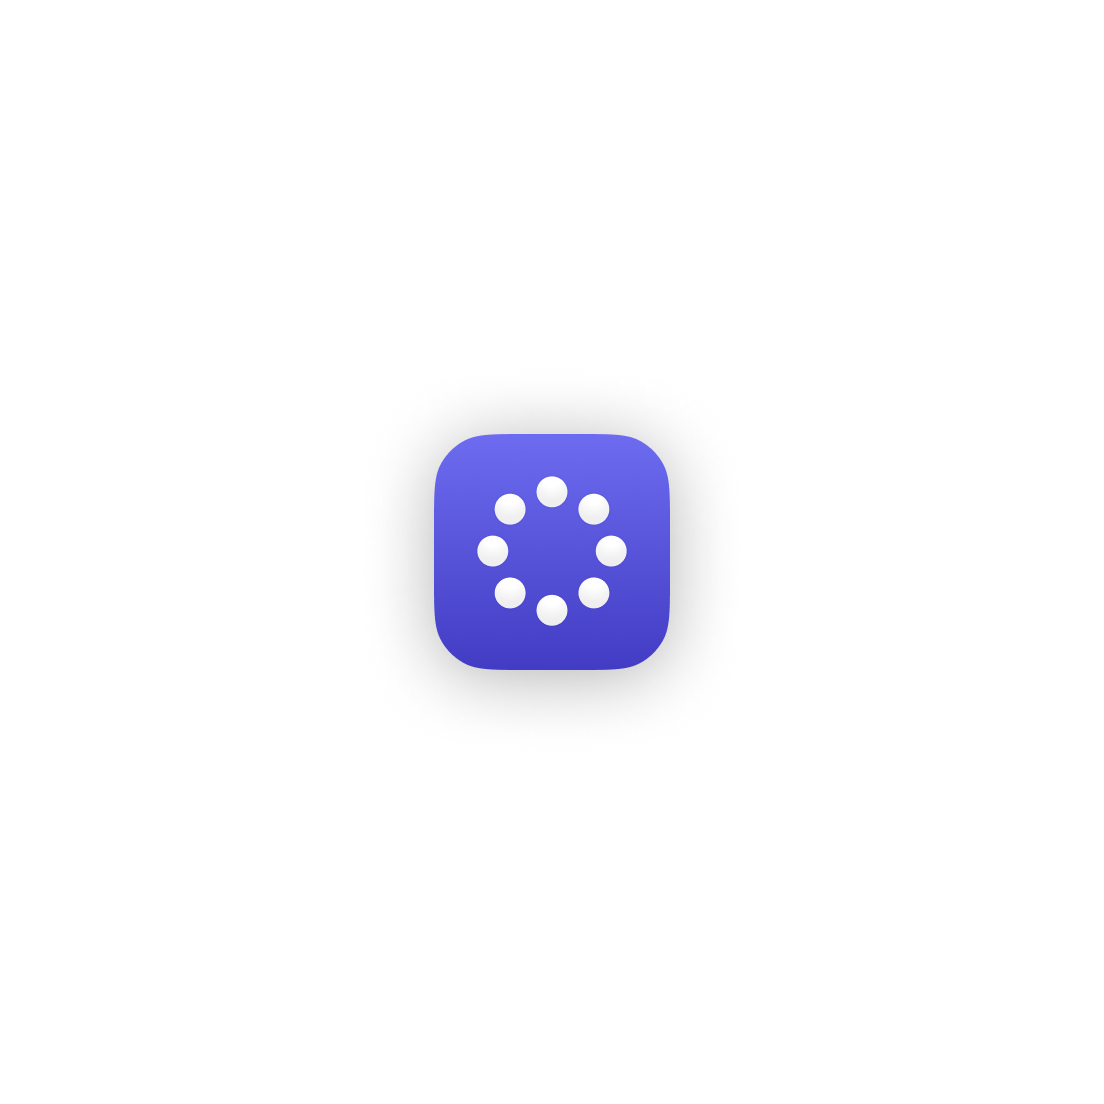 An icon that contains 8 dots arranged in a circle on a purple background.